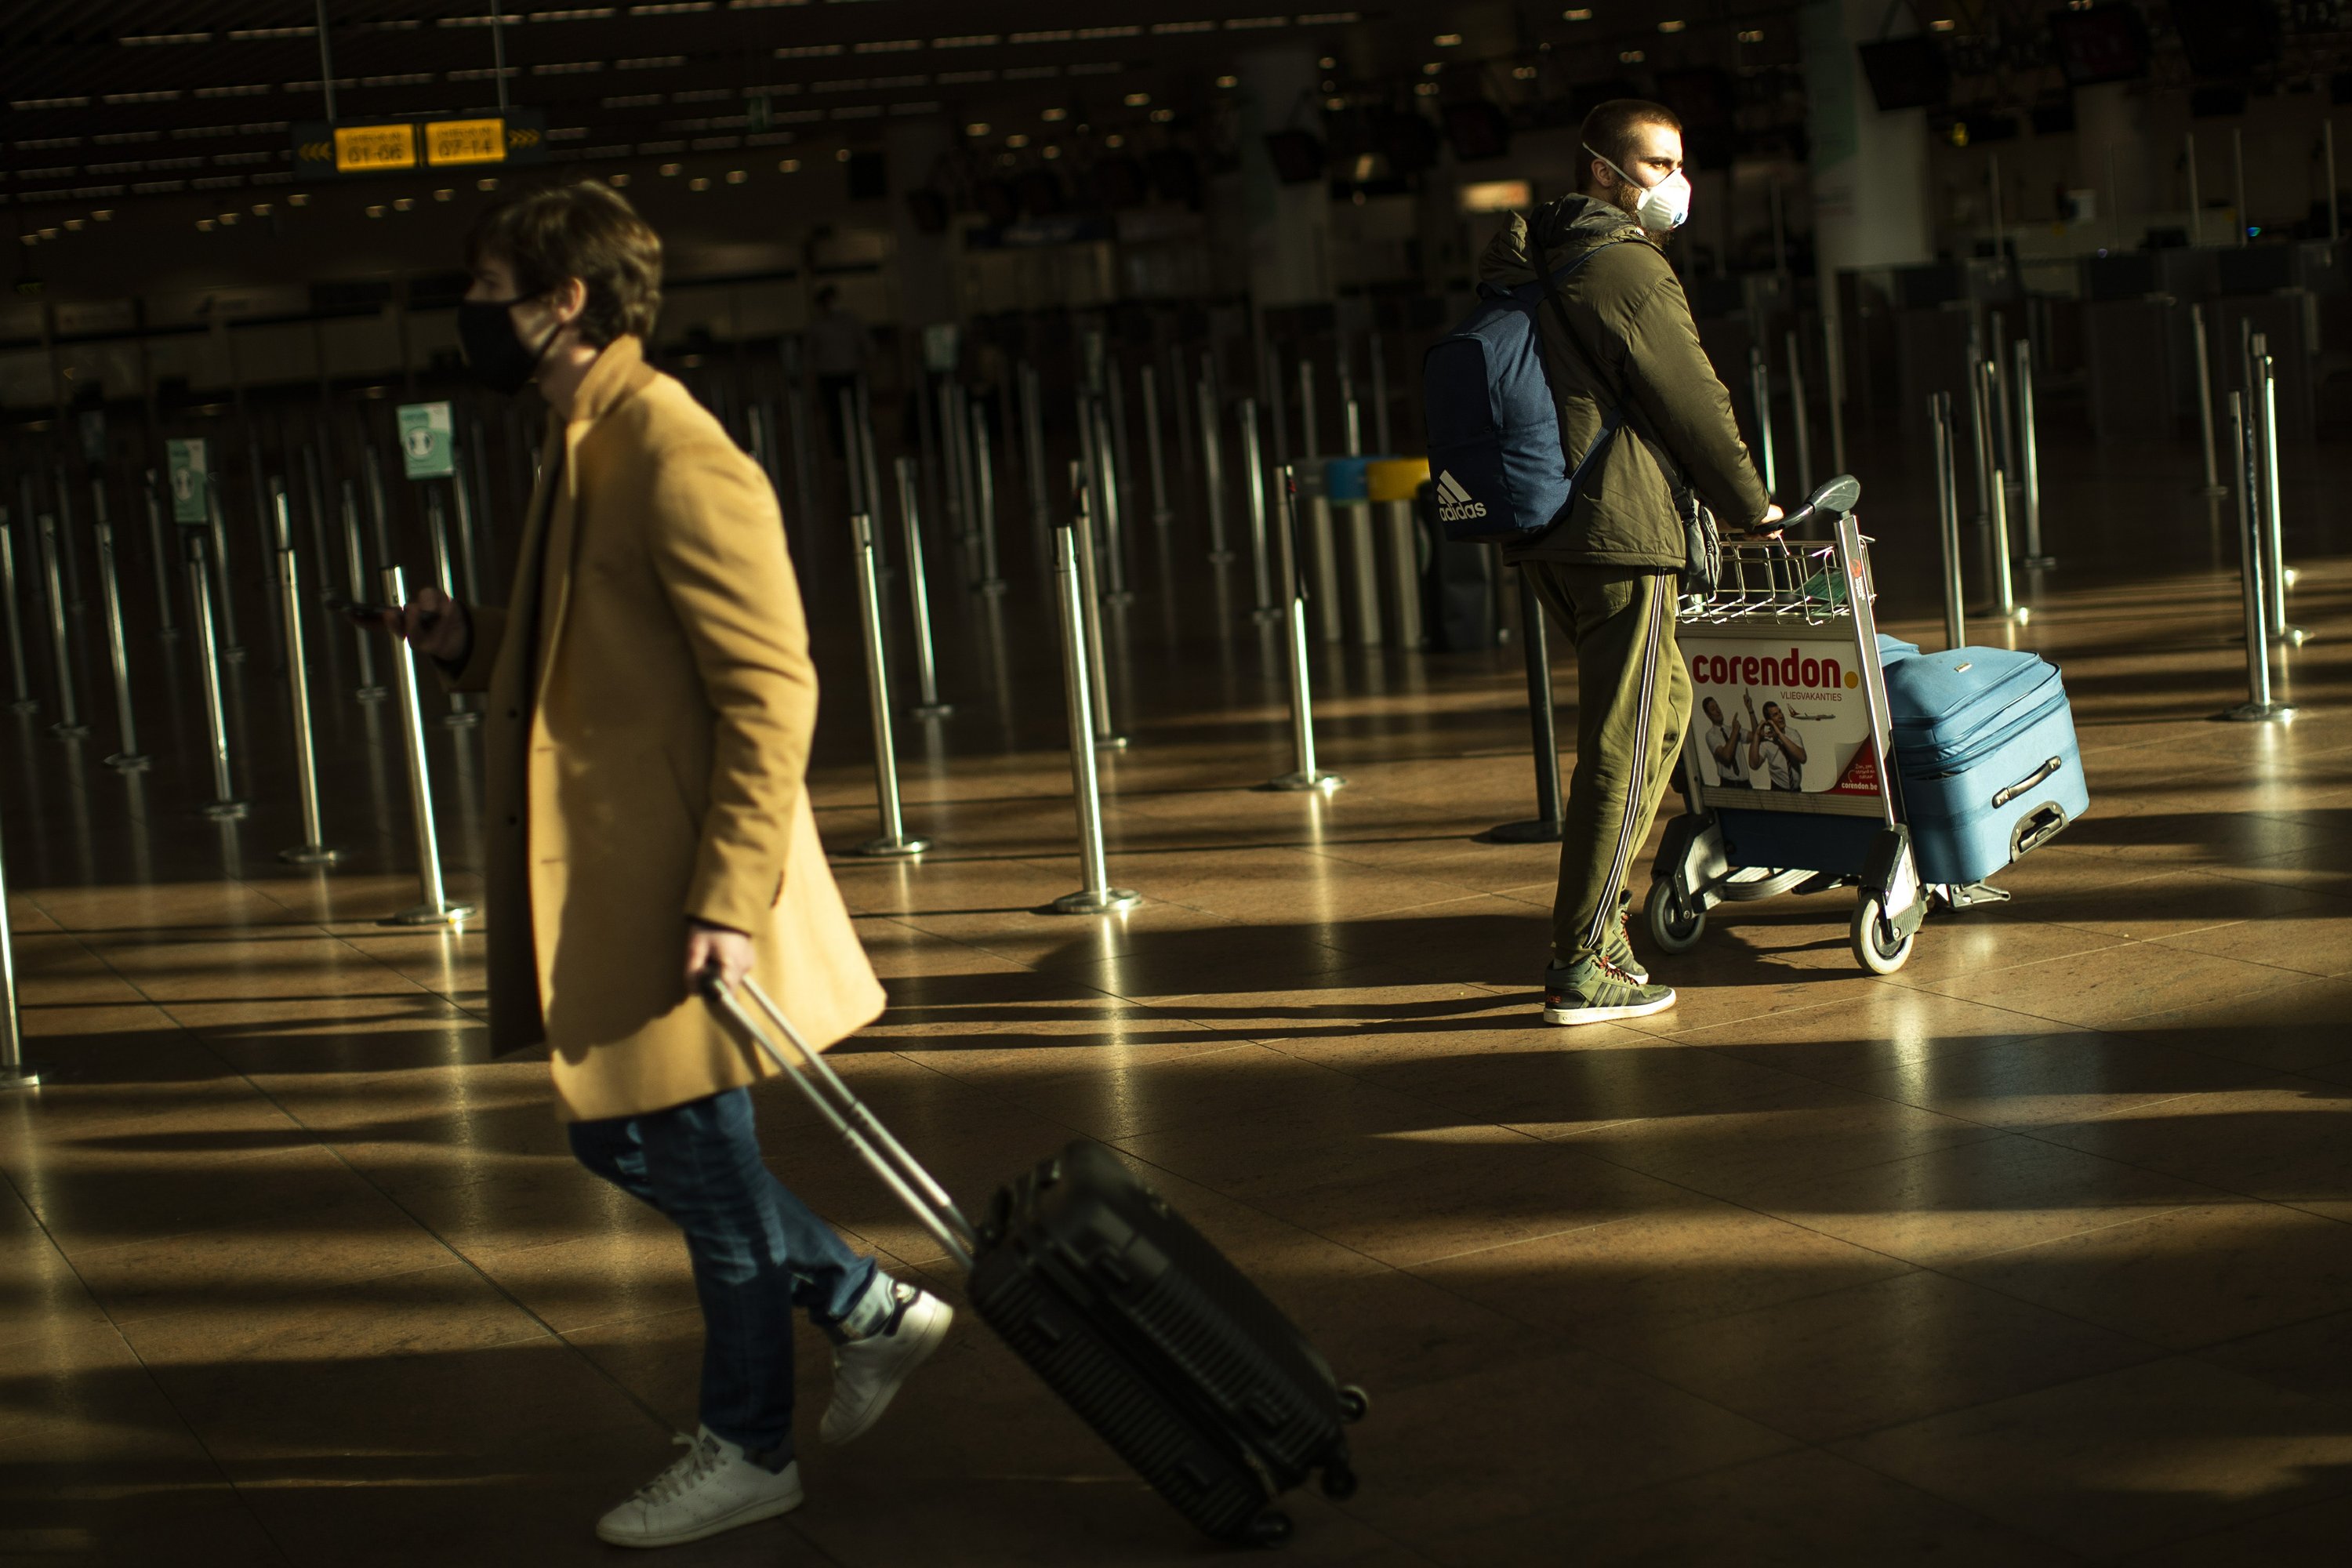 Belgium bans leisure travel for a month to combat the pandemic